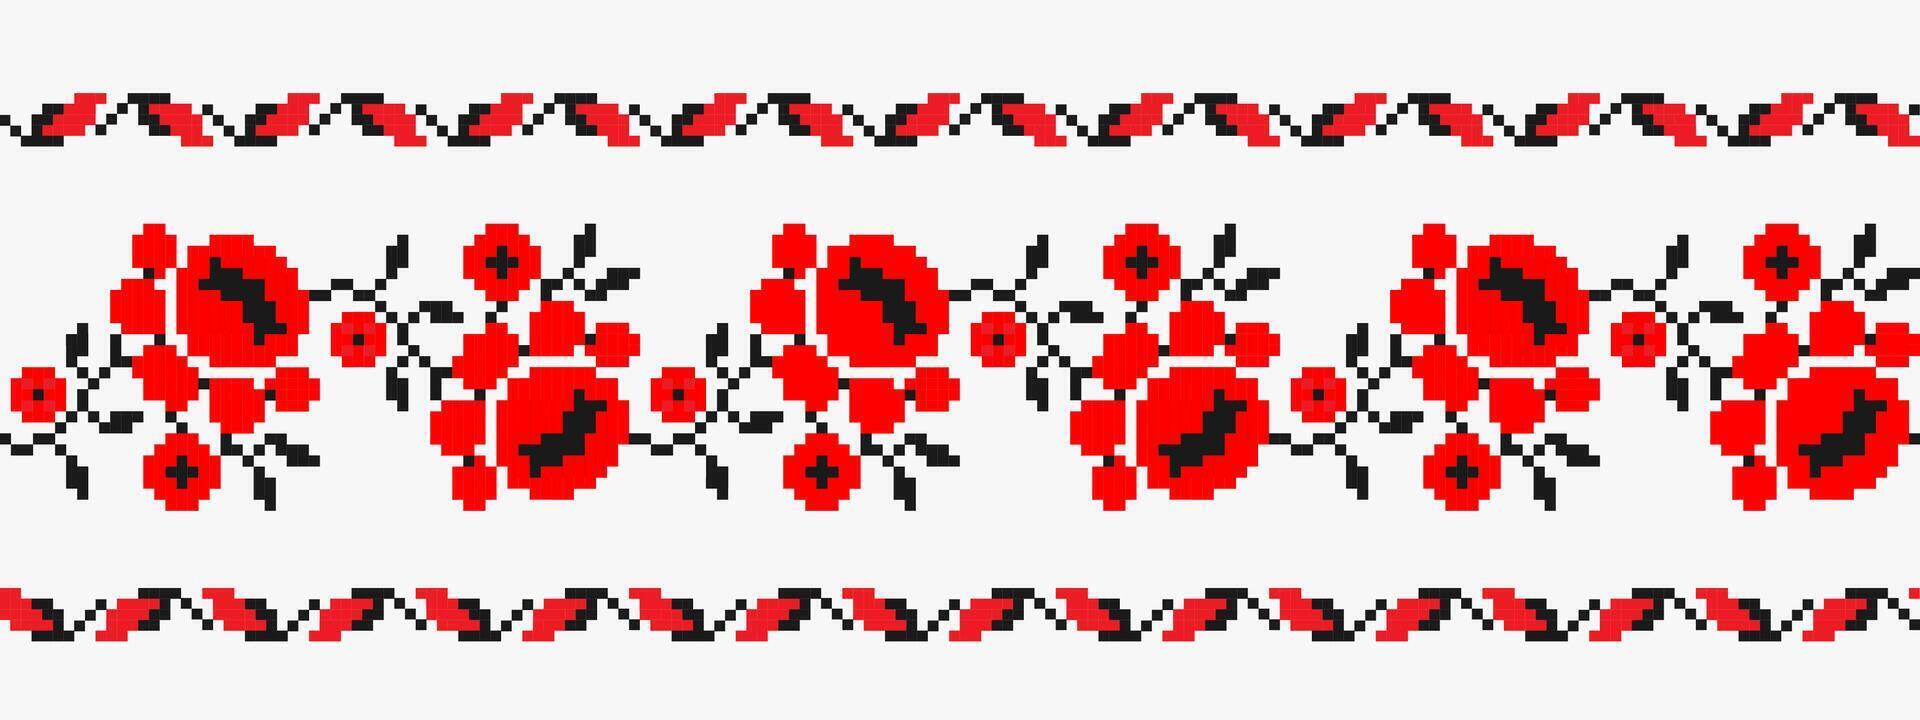 Ukrainian ornament in traditional colors on a white background, pixel style vector